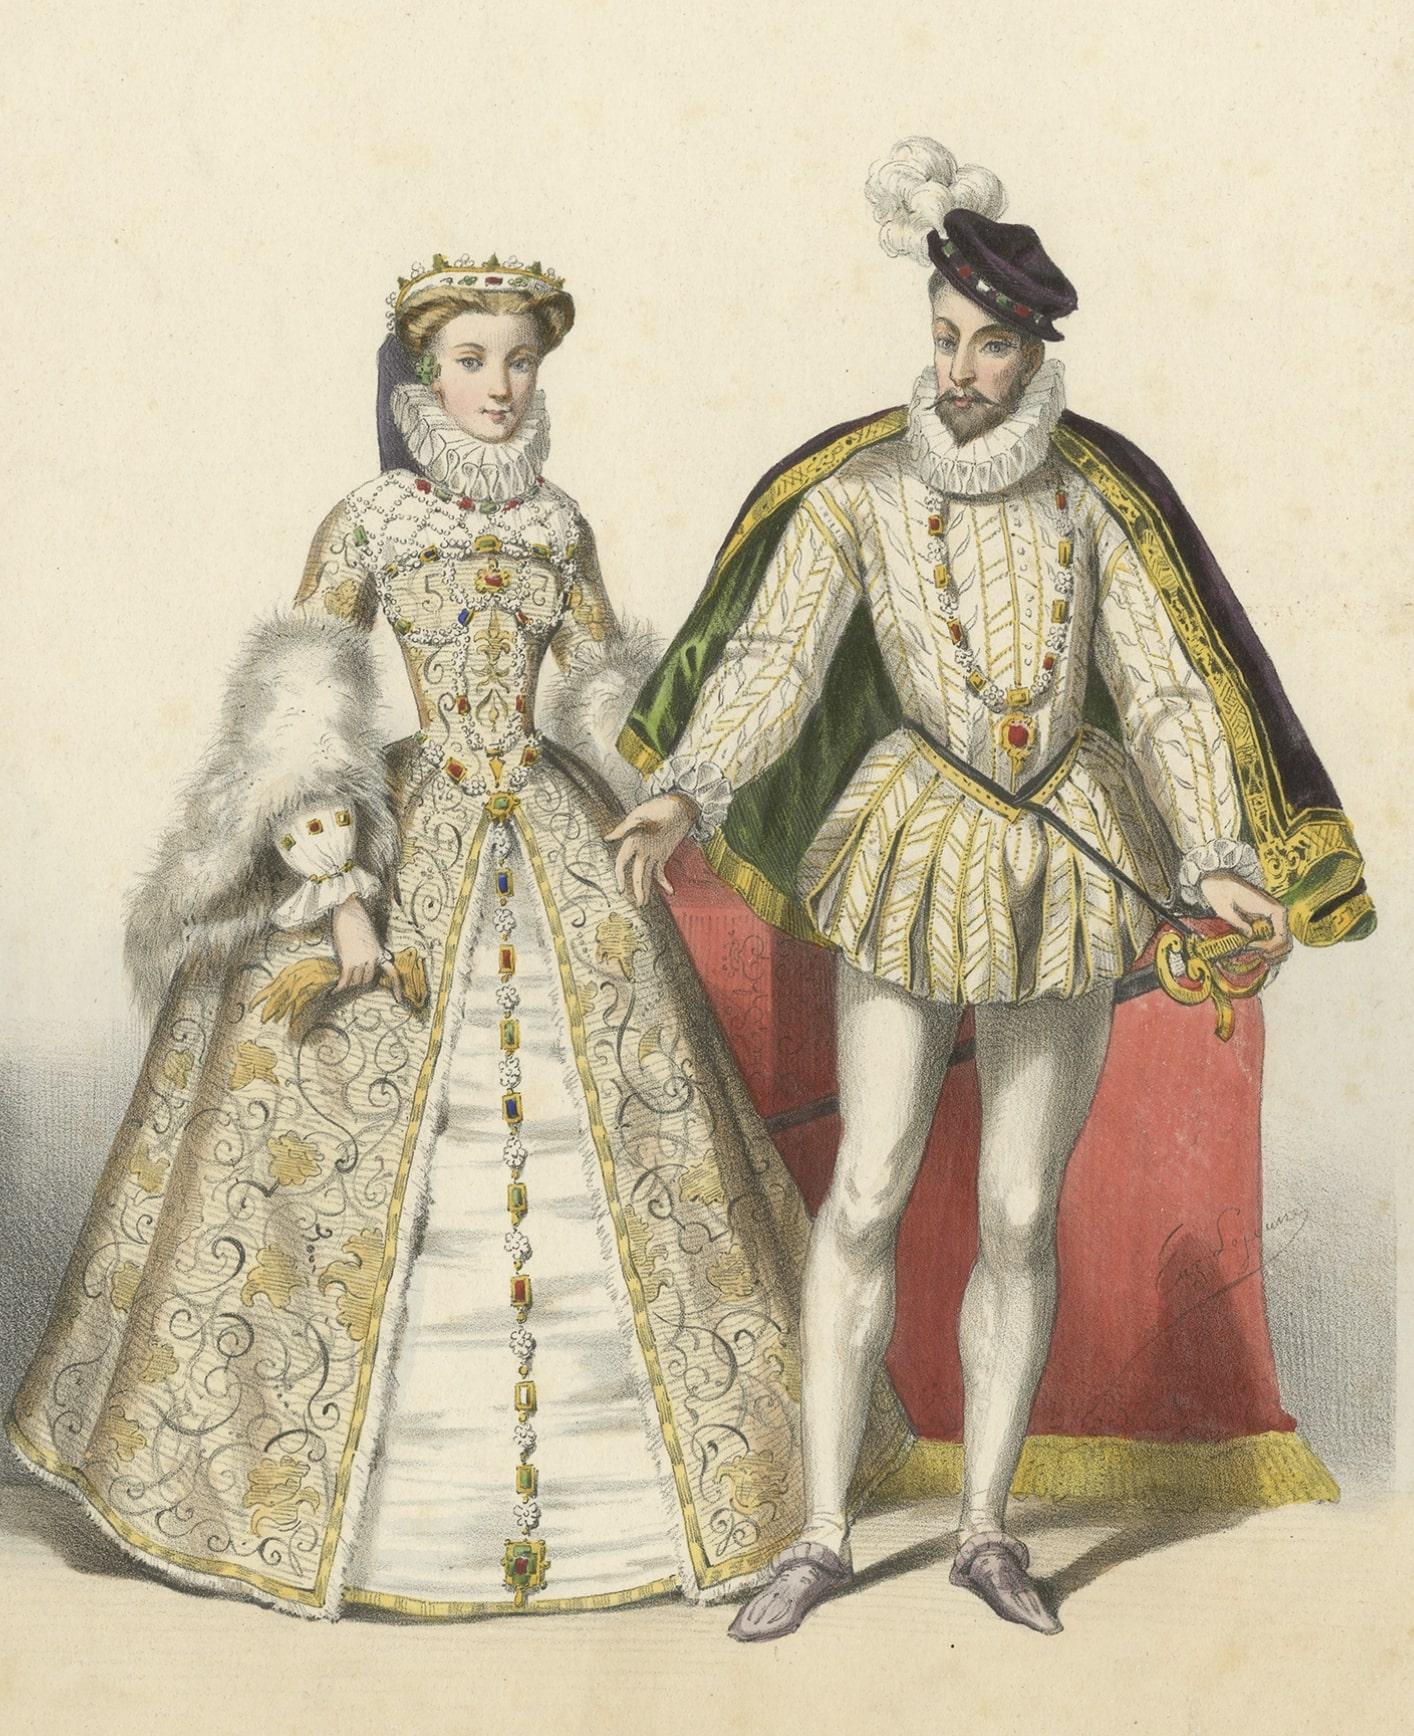 Antique print titled 'Elisabeth d'Autriche - Charles IX'. 

Lithograph of Elisabeth of Austria and Charles IX. Elisabeth of Austria was Queen of France from 1570 to 1574 as the wife of King Charles IX. A member of the House of Habsburg, she was